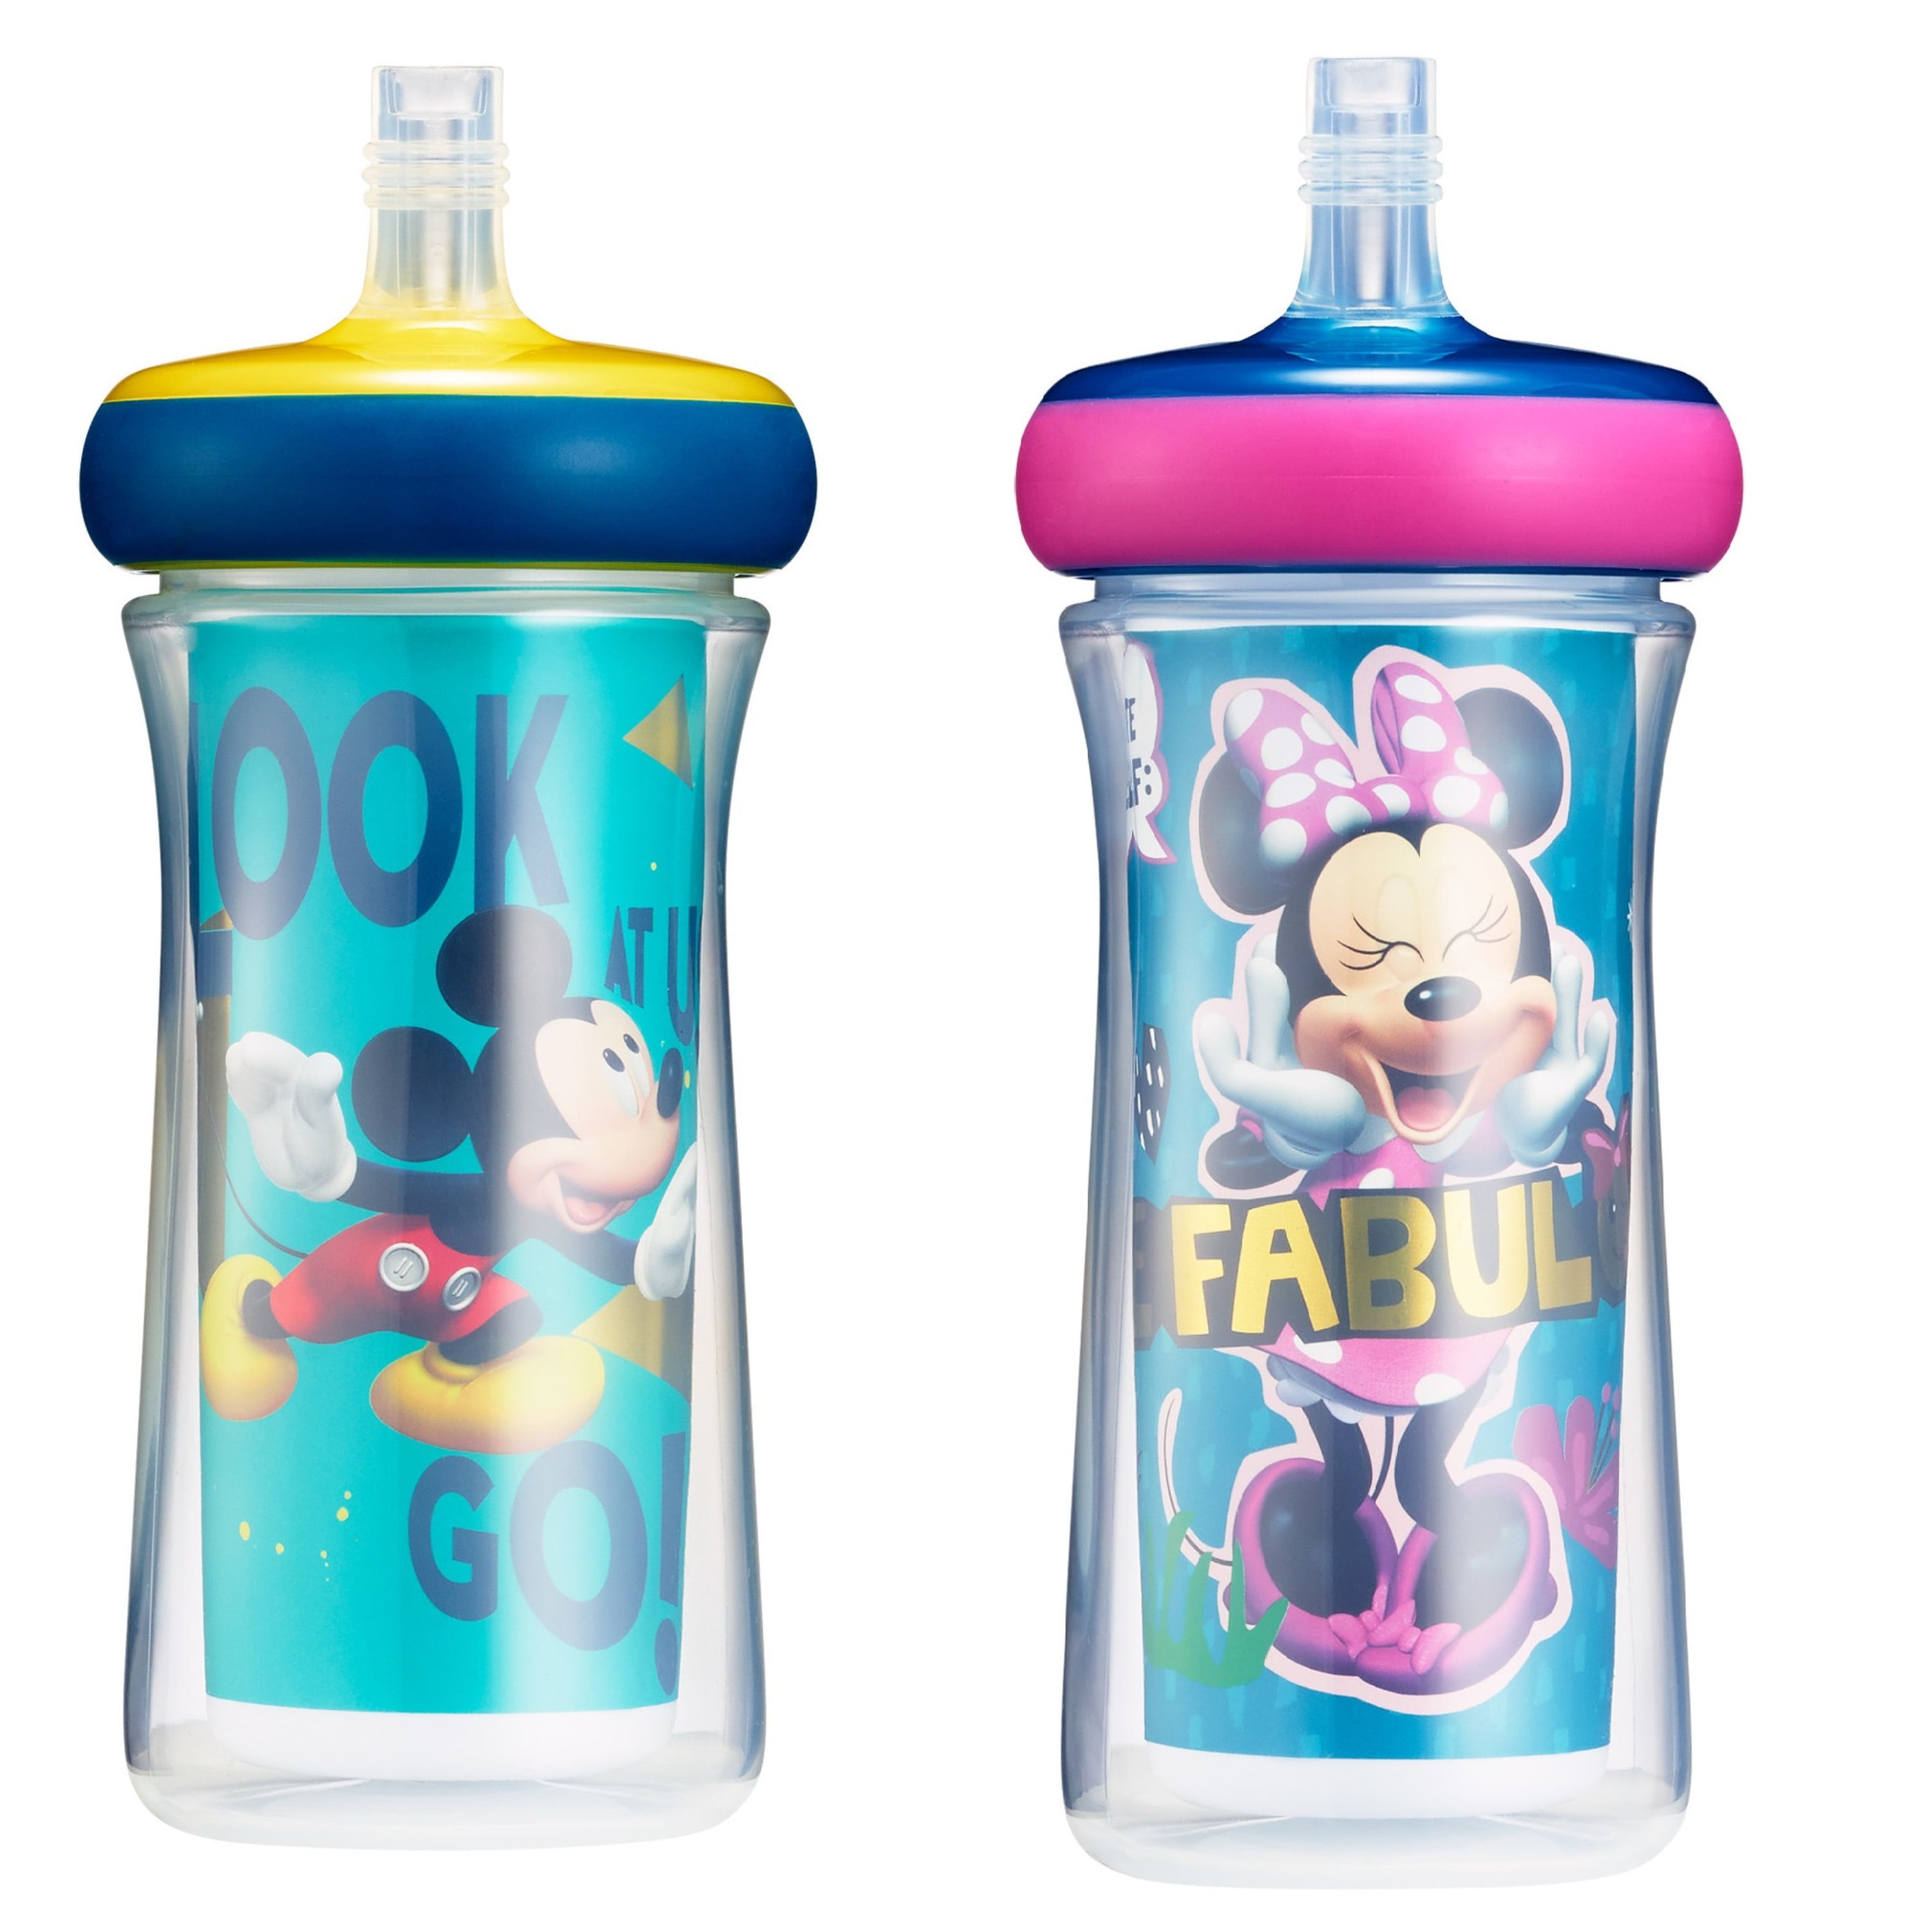 The First Years Flip-Top Straw Cup for Toddlers, Disney Mickey Mouse, 10 oz  (2)